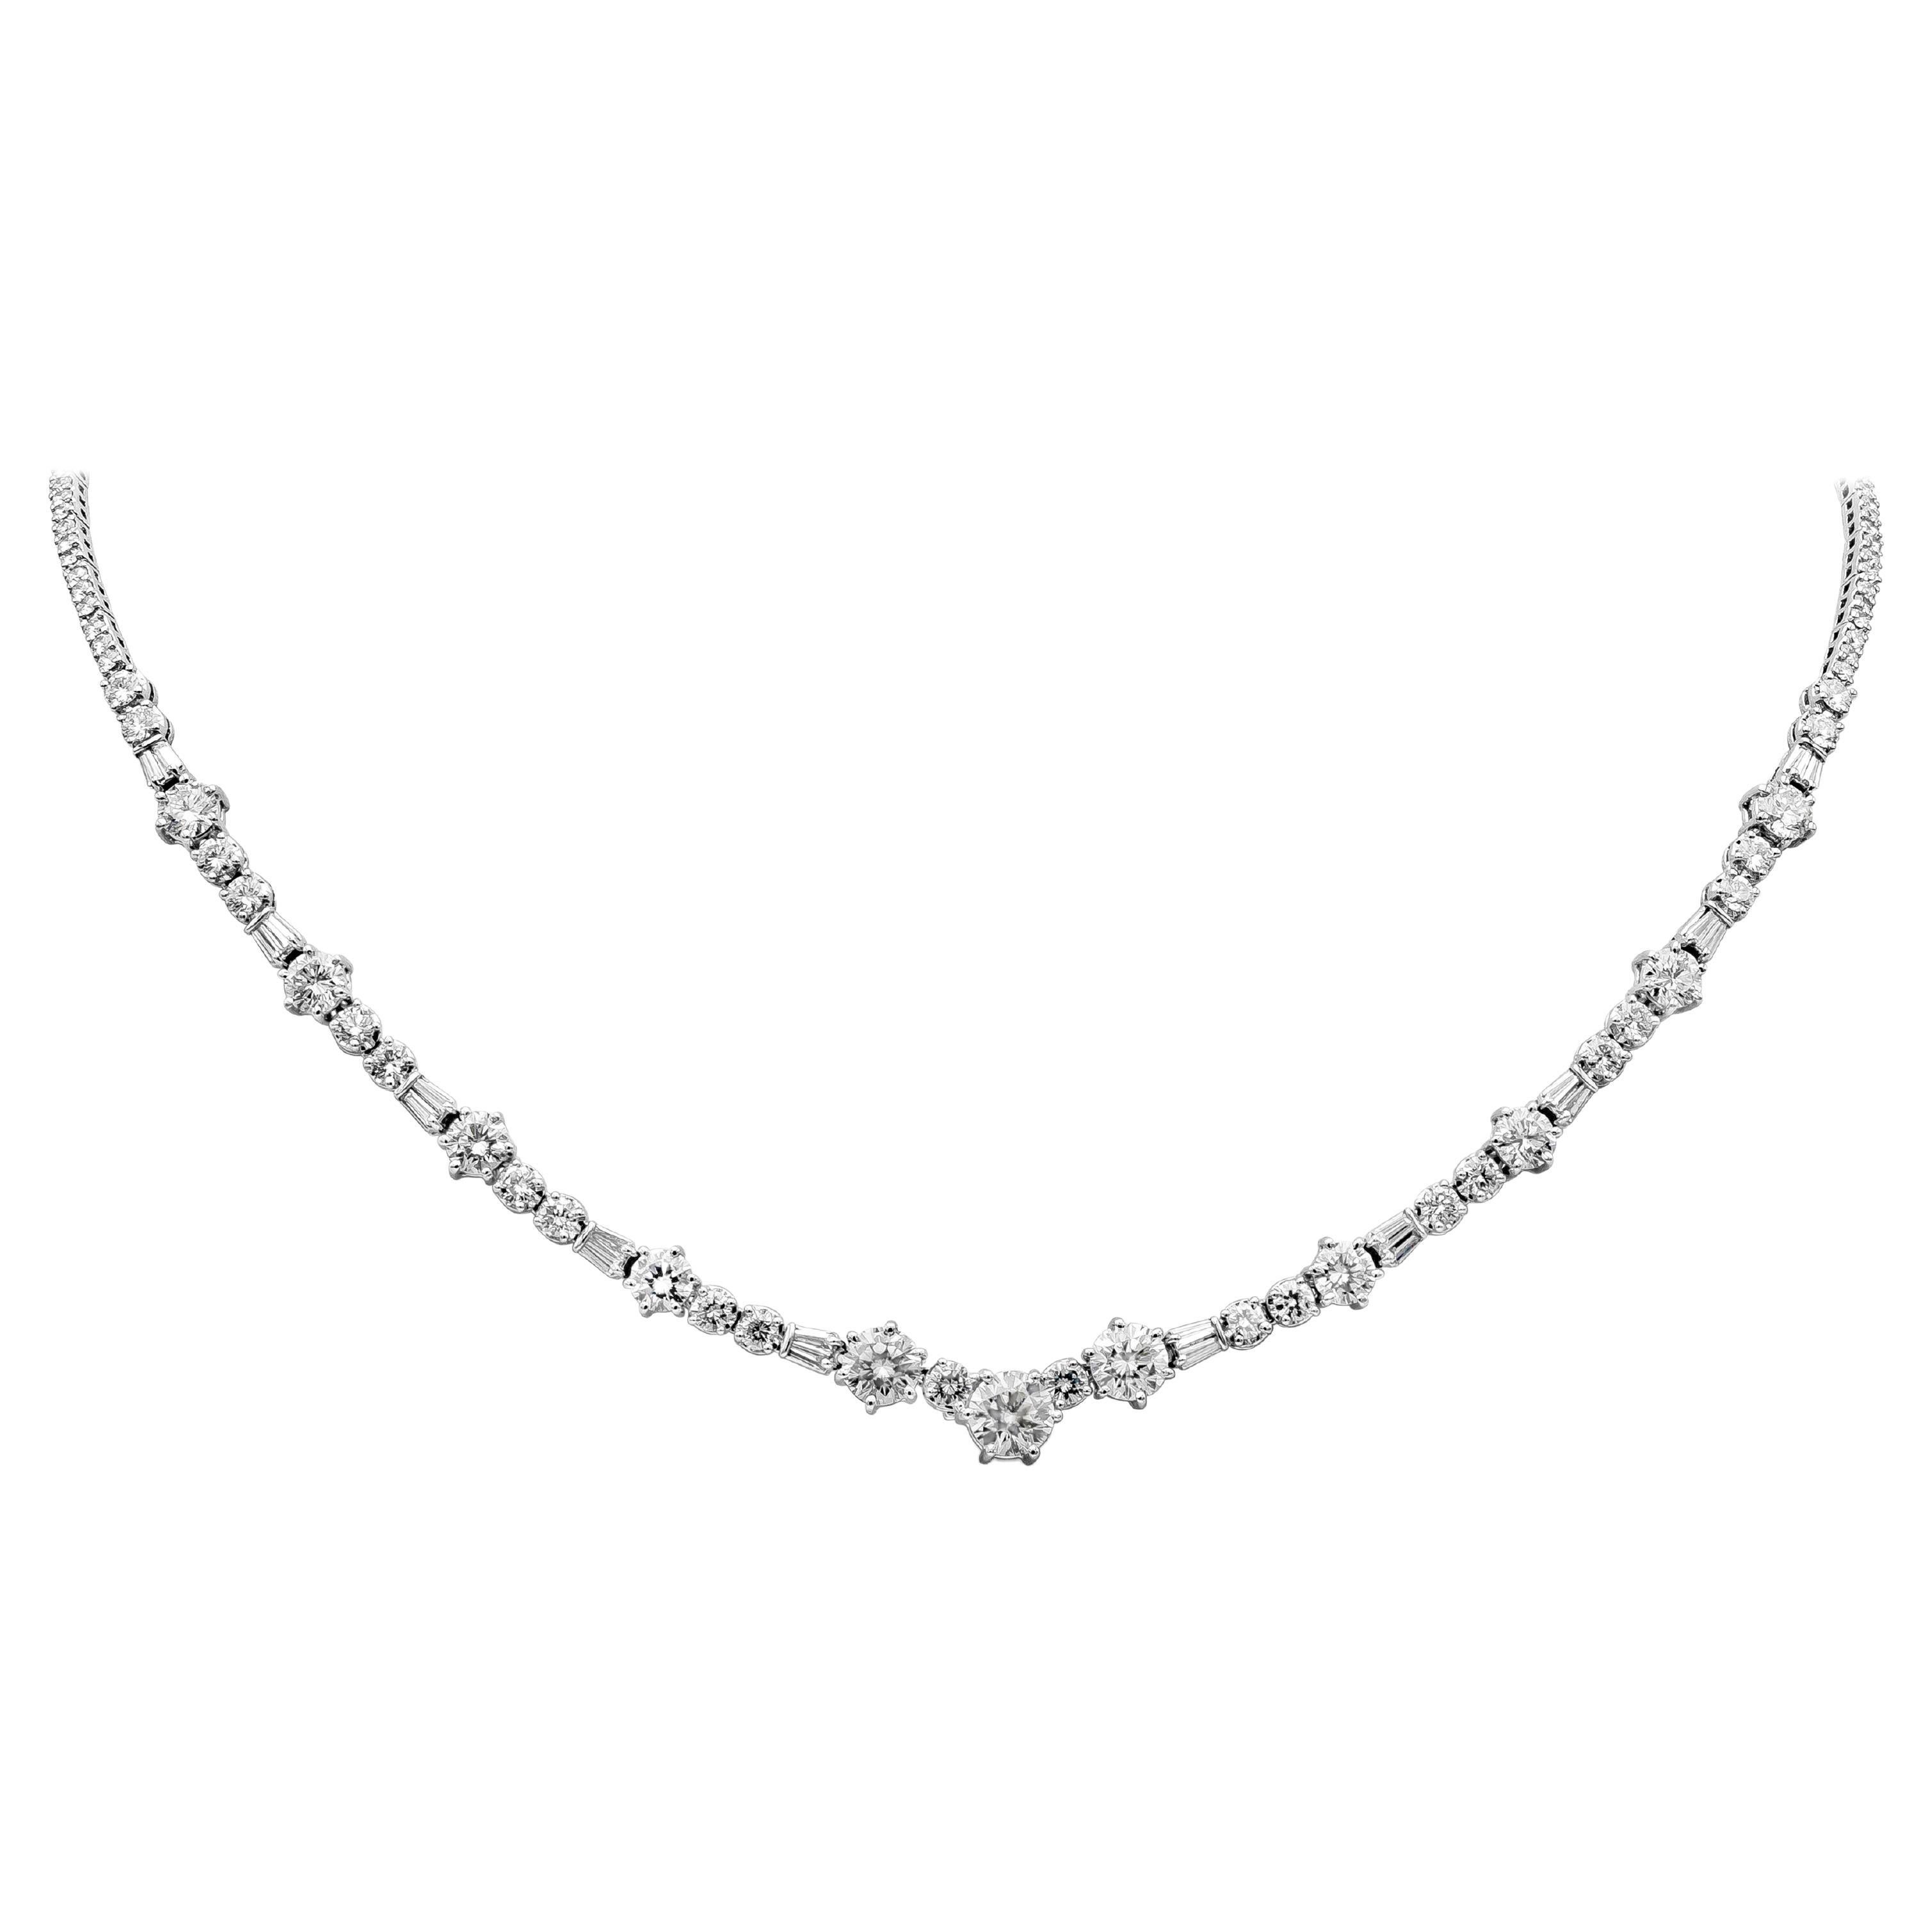 Baguette and Round Diamond Circlet White Gold Necklace, 5.3 Carat